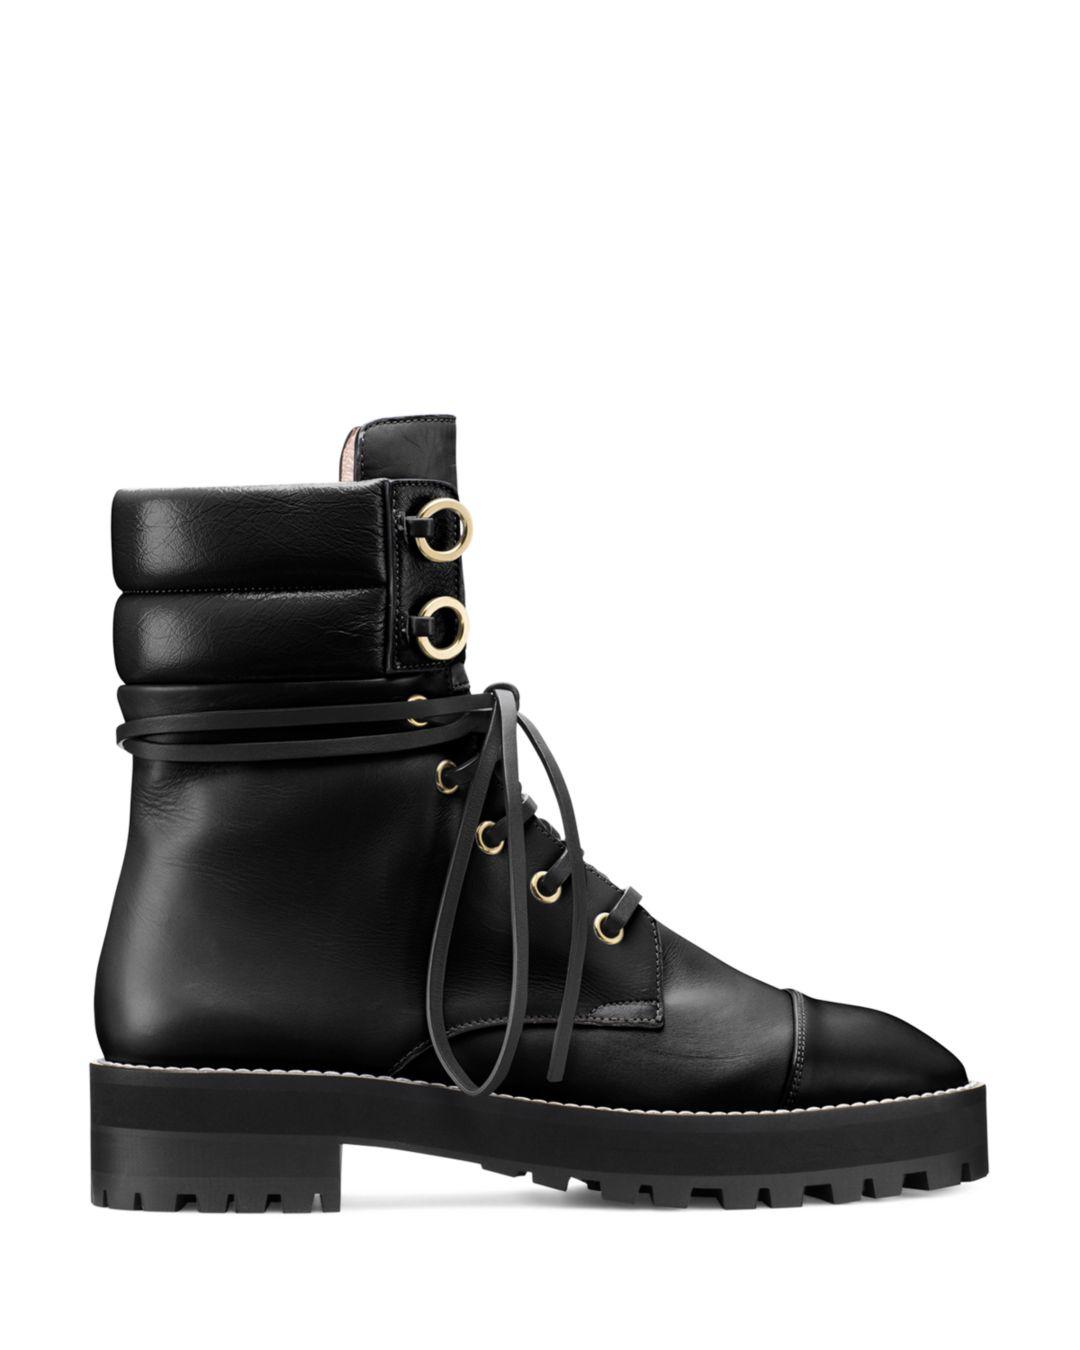 Stuart Weitzman Women's Lexy Round Toe Leather Lace Up Boots in Black ...